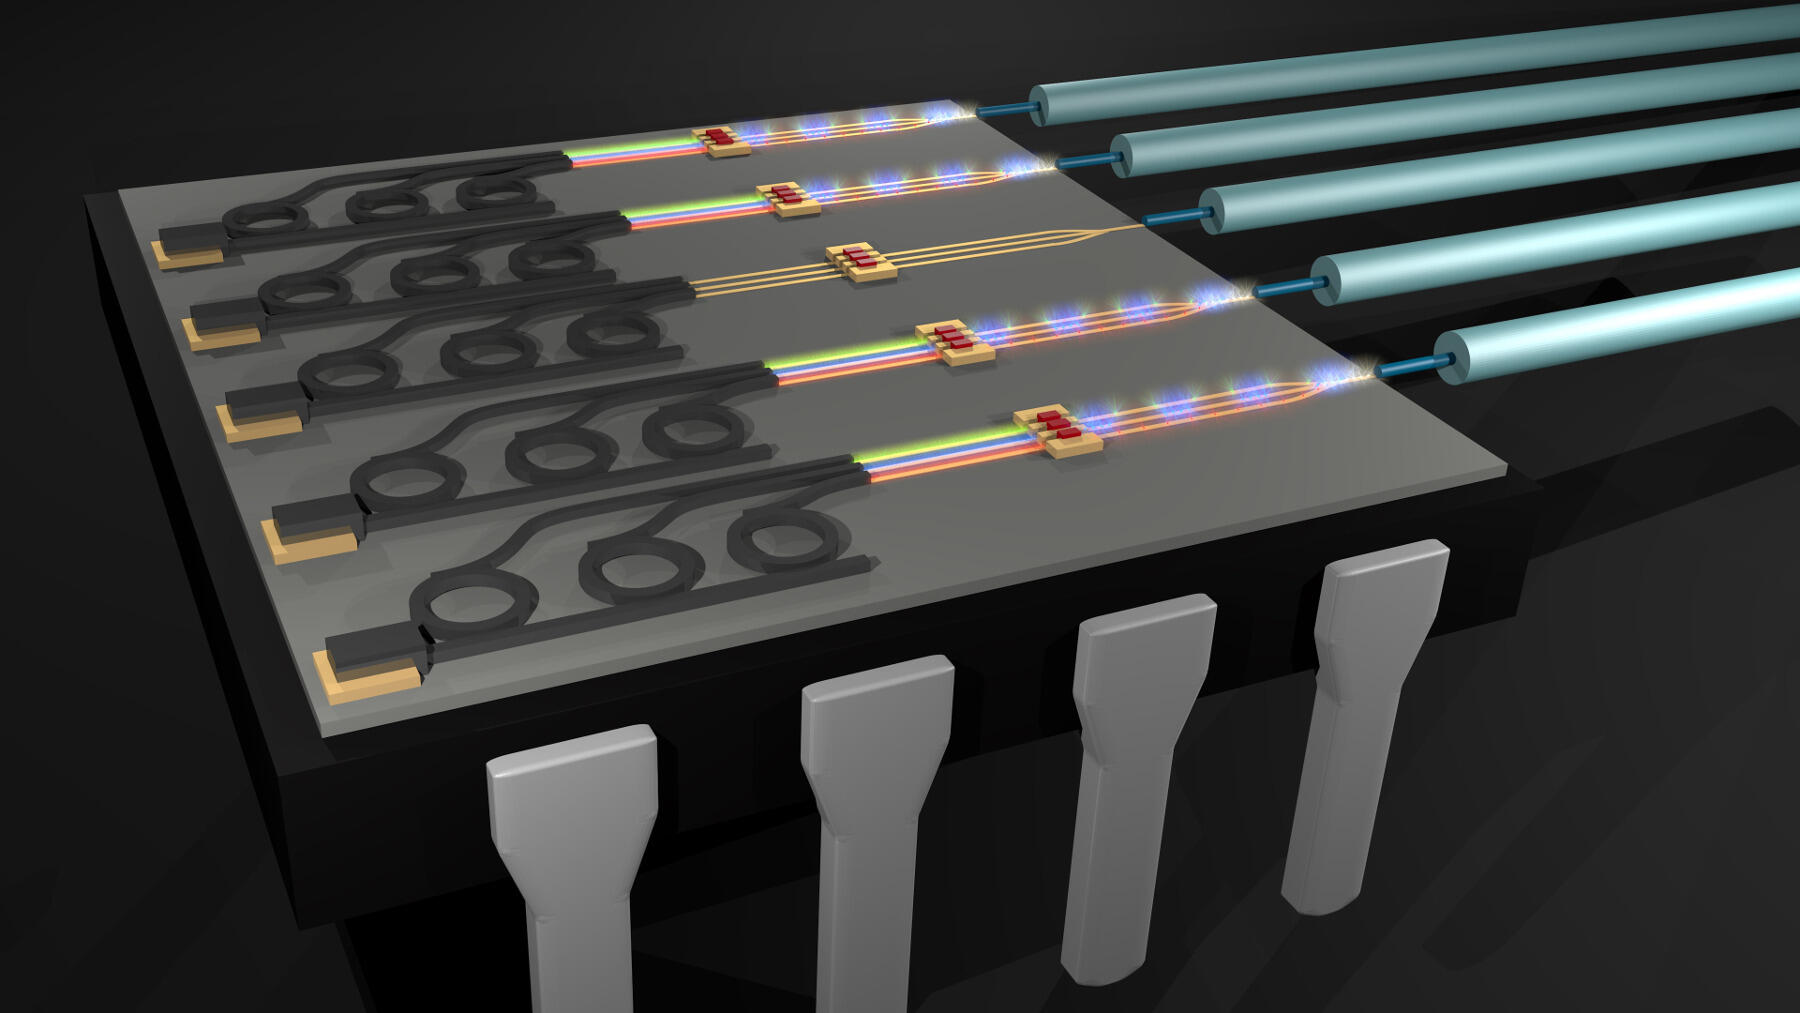 Illustration of a future optical transmitter chip which combines photonics (lasers), plasmonics (signal modulators) and electronics (control signals) together to achieve extreme performance and efficiency.